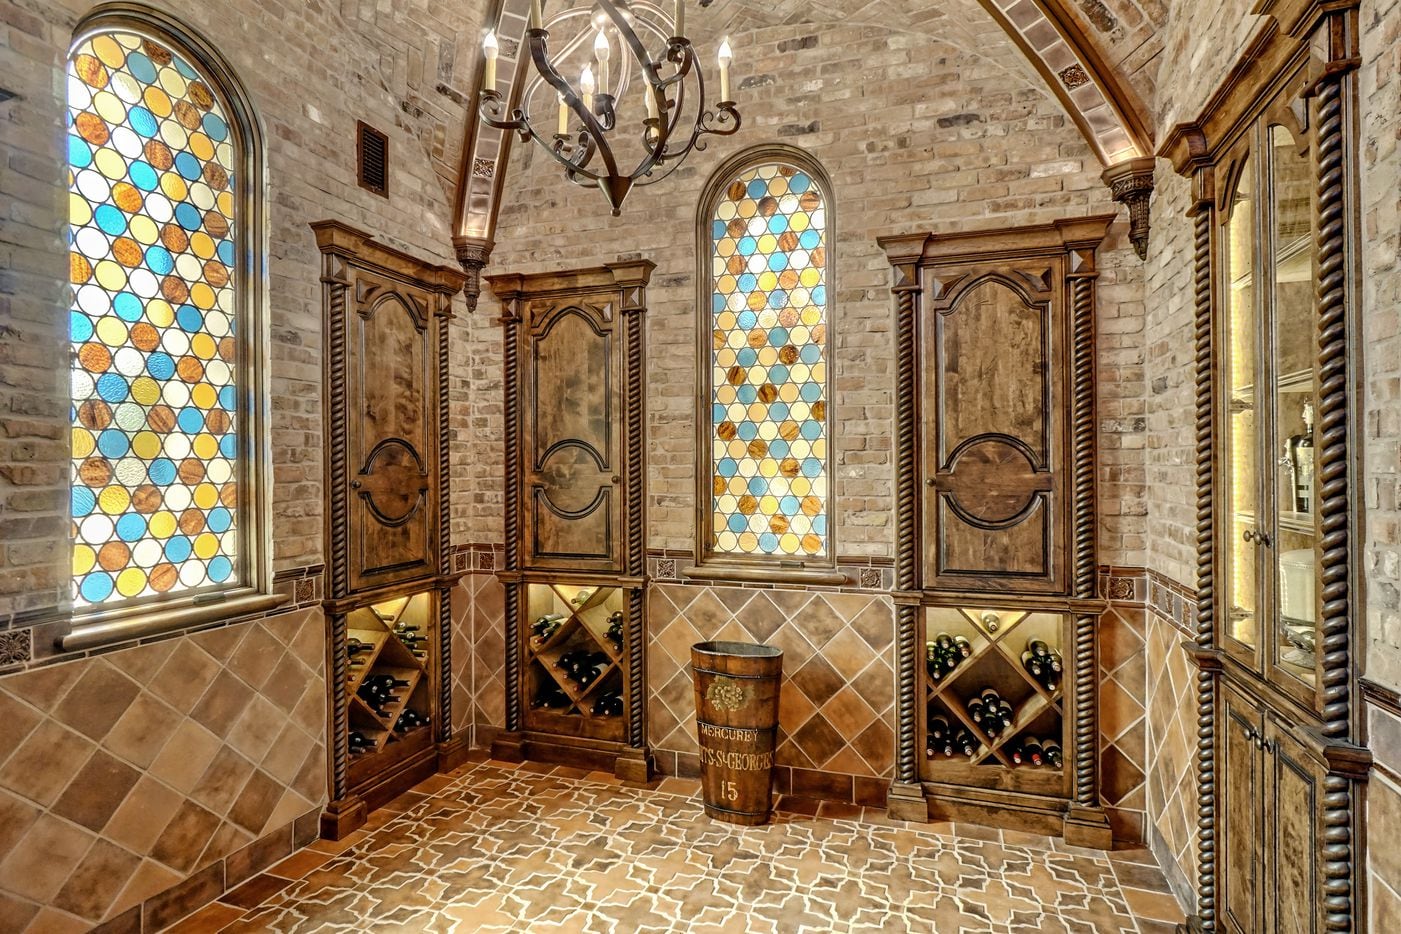 The wine storage room, or "grotto" at 5513 Montclair Drive in Colleyville, TX.